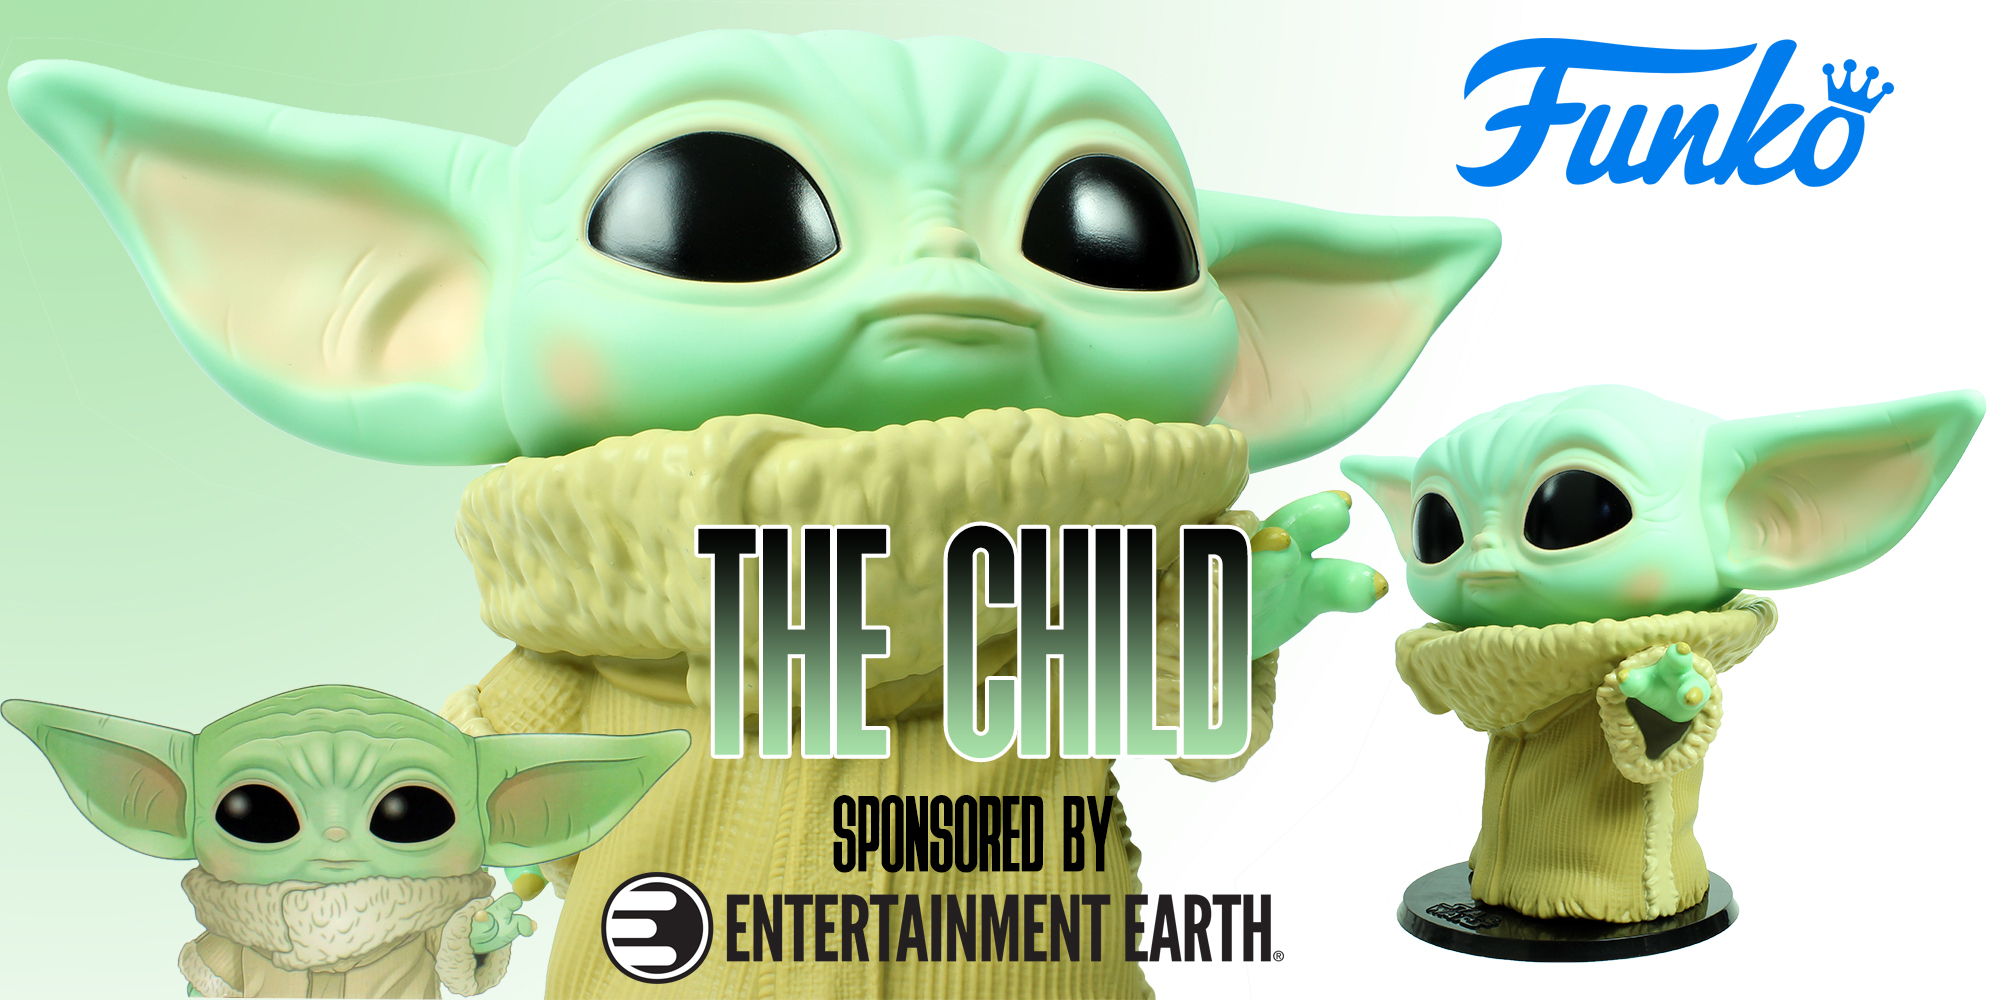 A Look At The Pop! Vinyl 10" Super-sized The Child Figure!